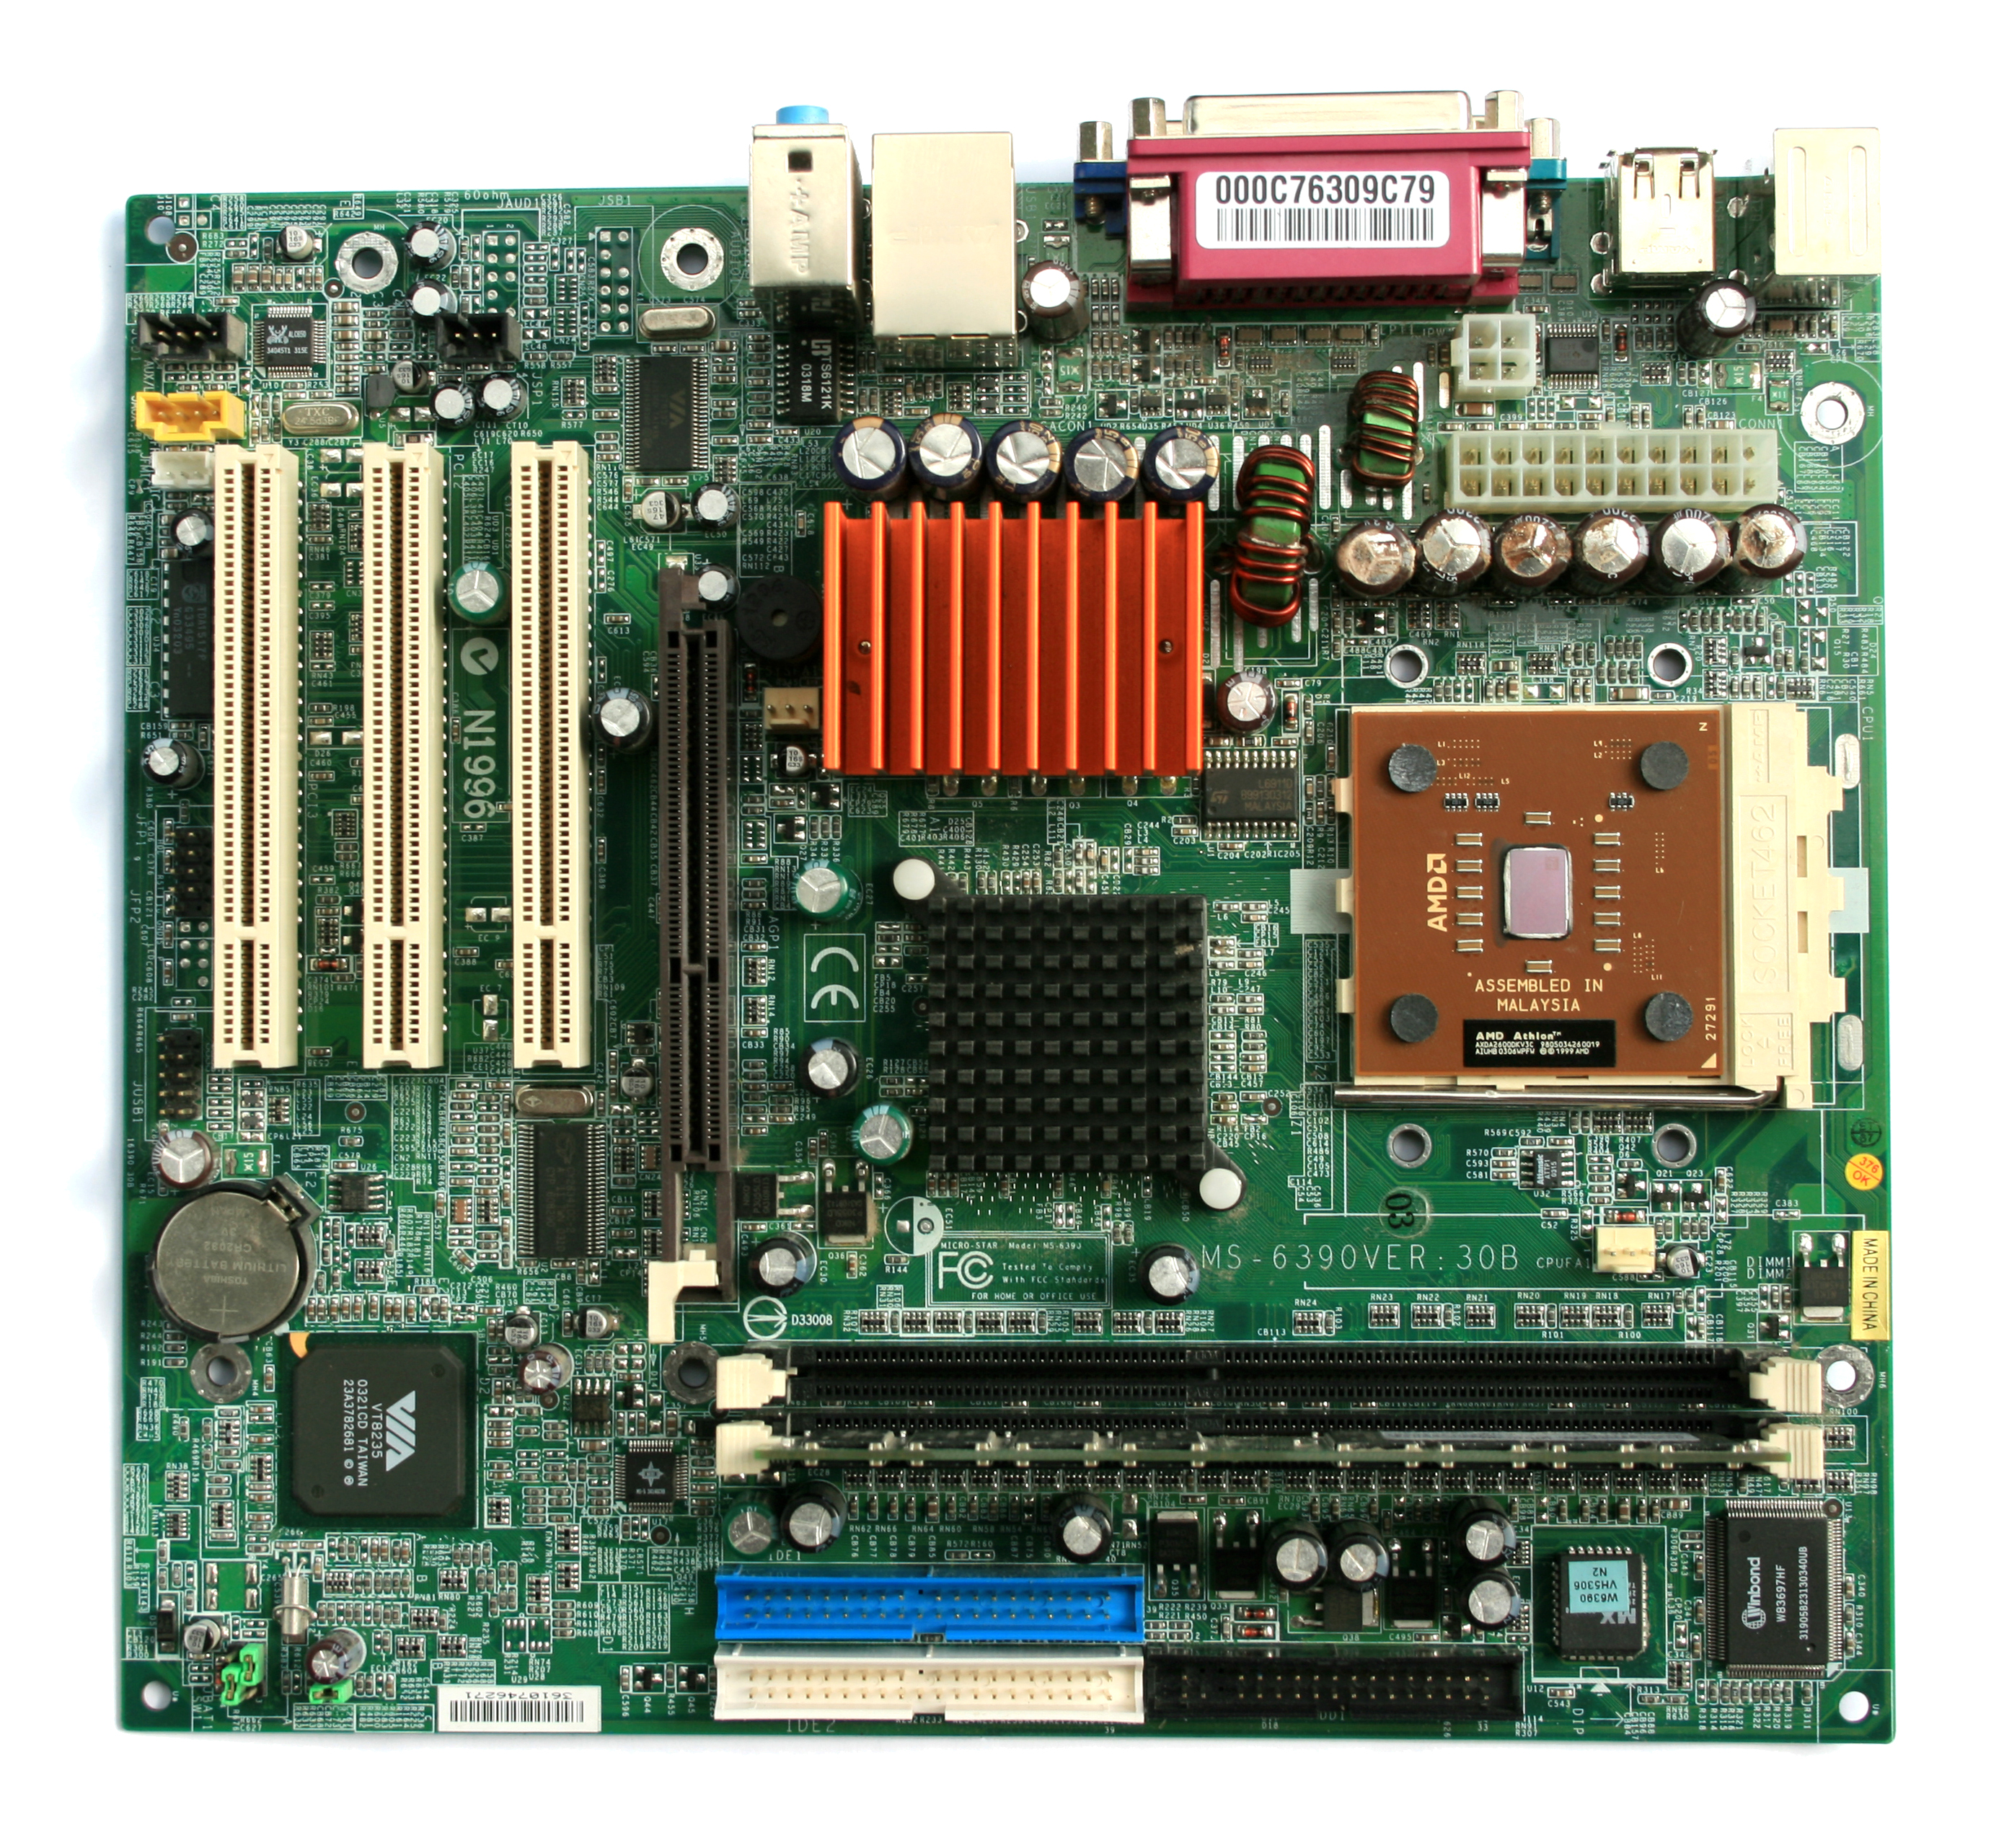 Computer motherboard with various hardware components